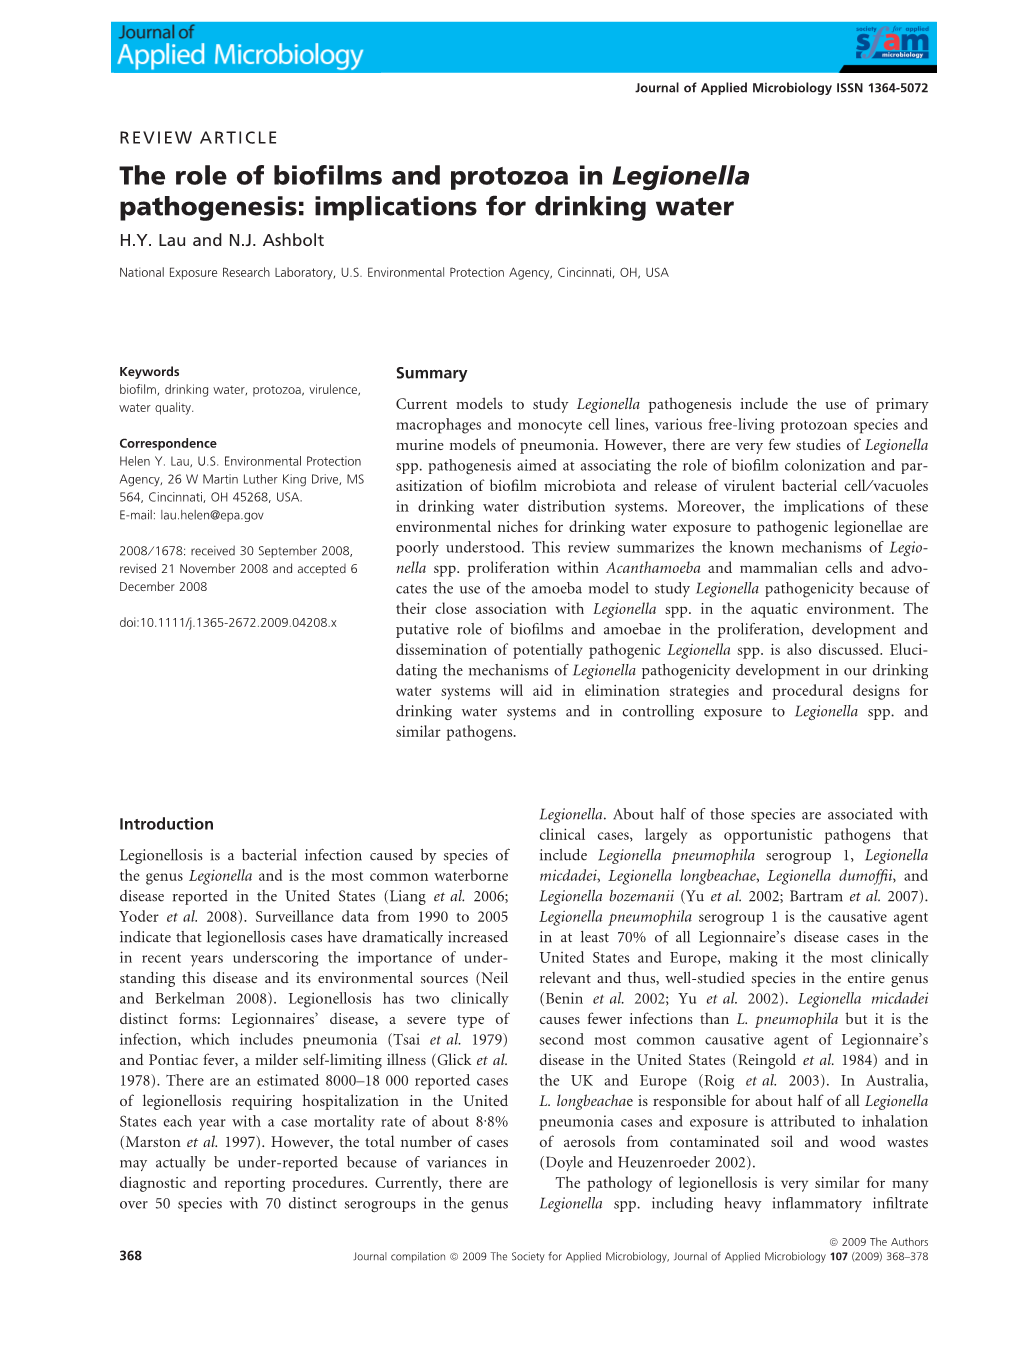 The Role of Biofilms and Protozoa in Legionella Pathogenesis: Implications for Drinking Water